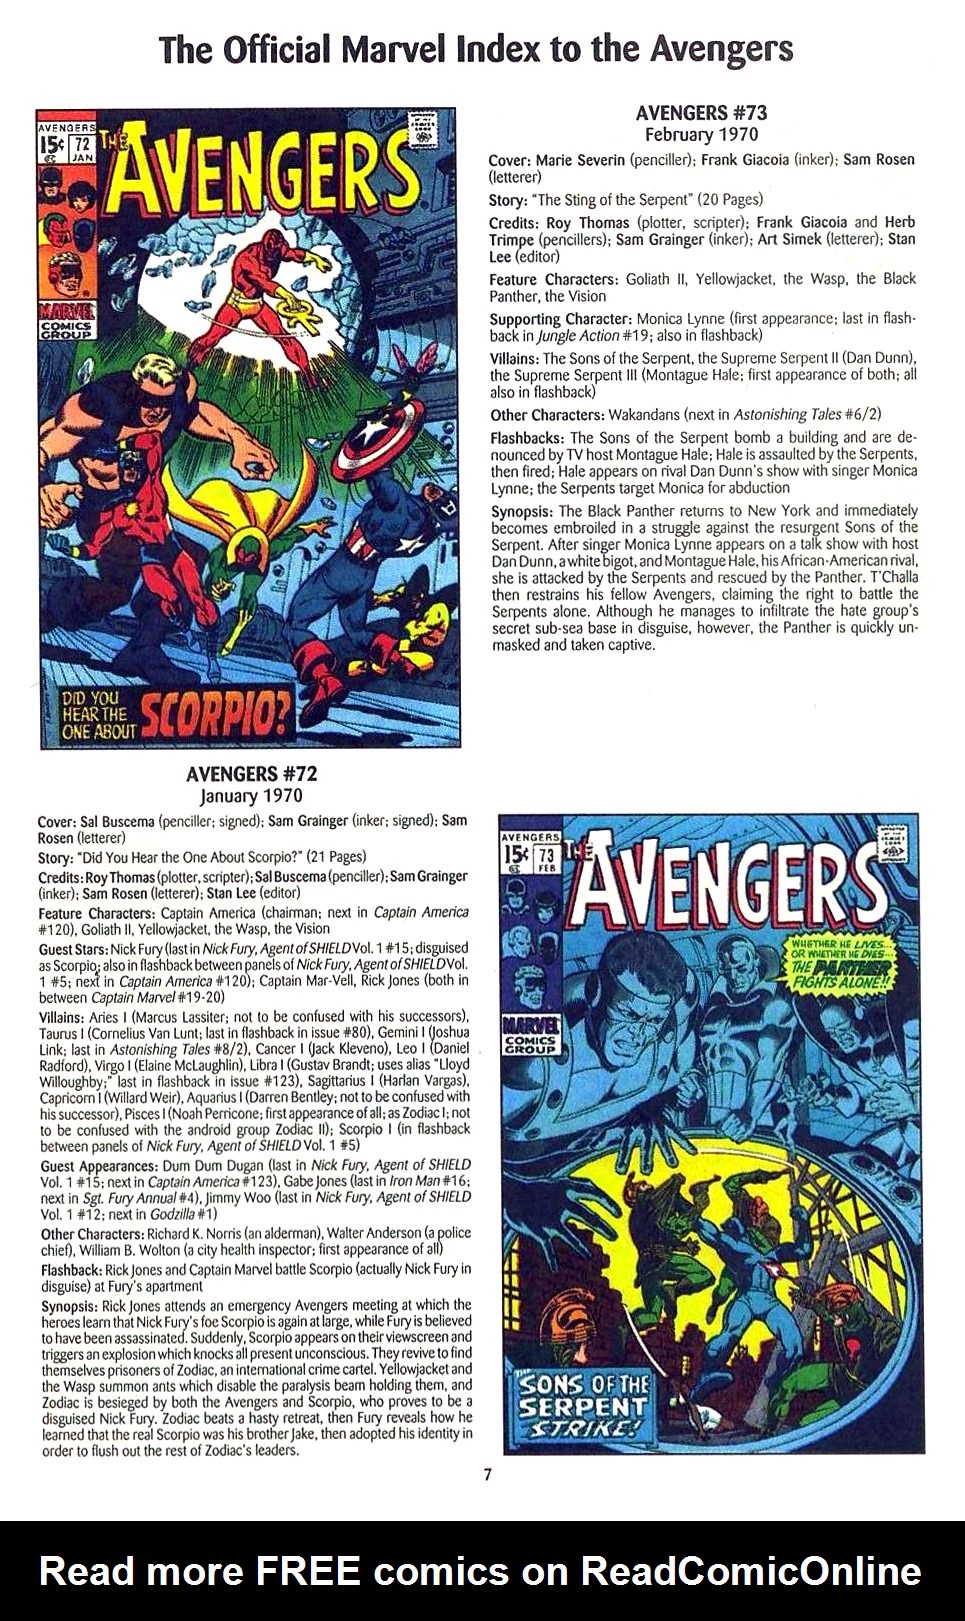 Read online The Official Marvel Index to the Avengers comic -  Issue #2 - 9